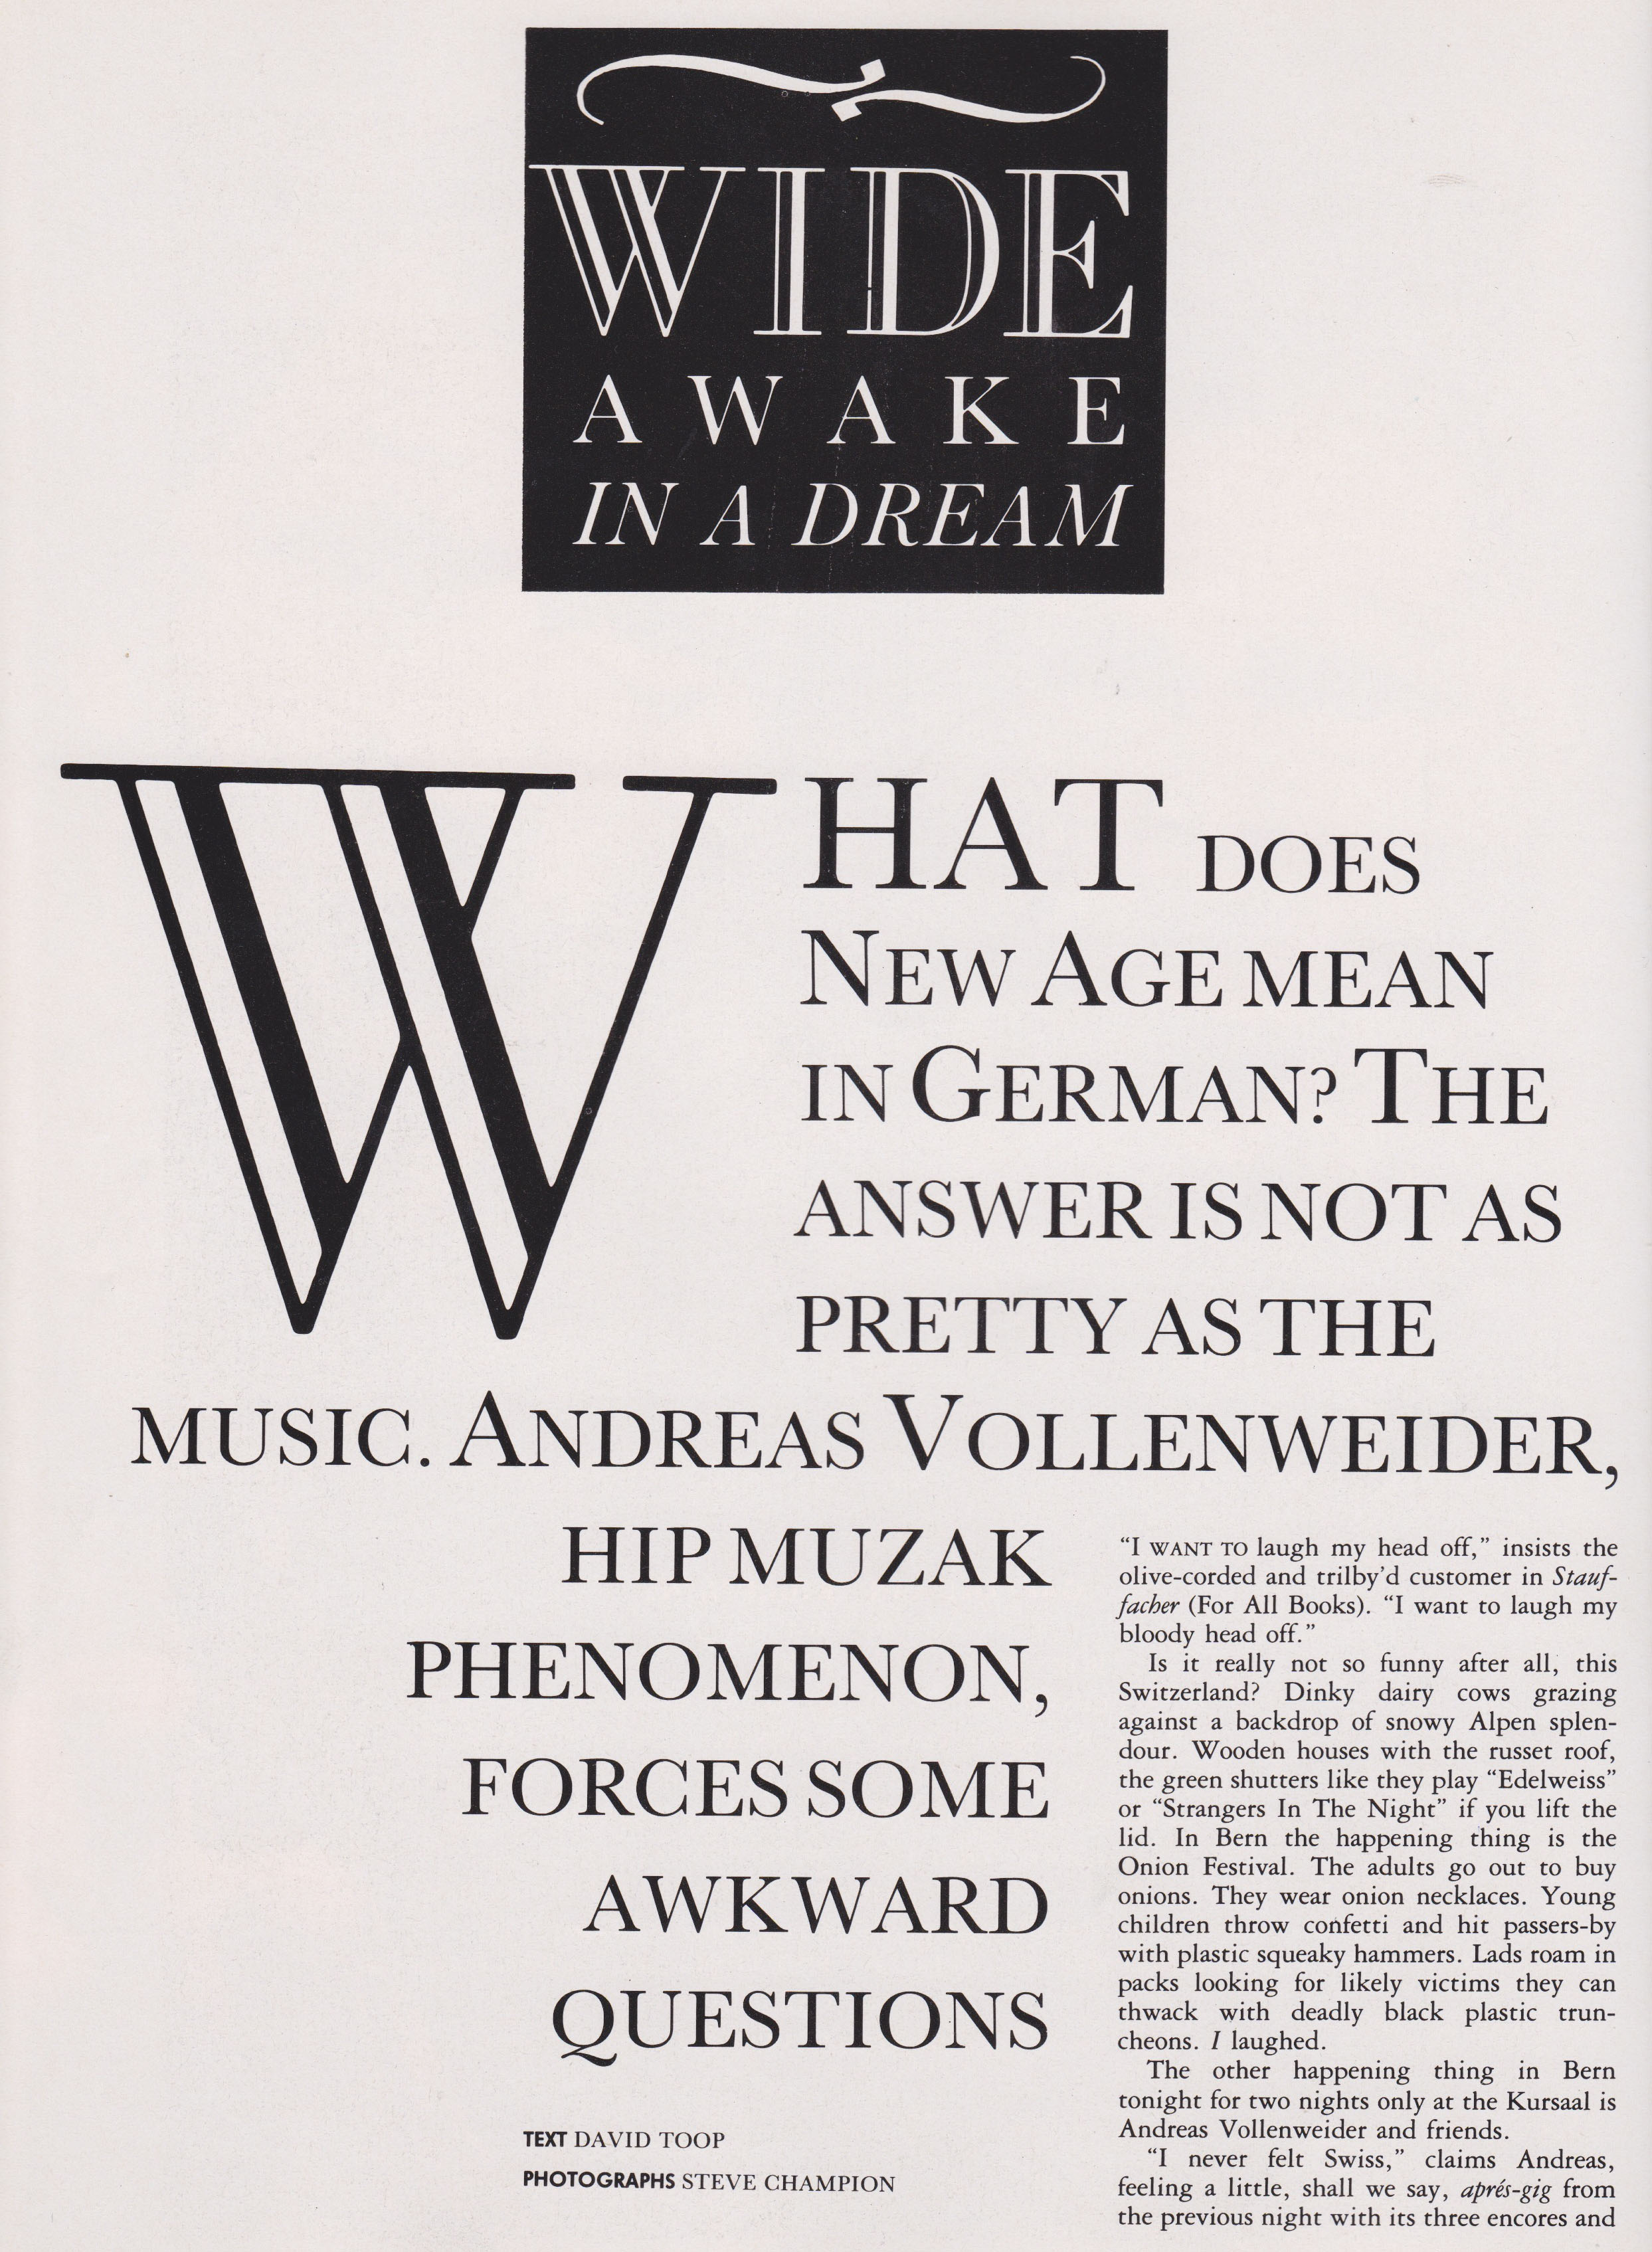 Andreas Vollenweider, The Face, January, 1987, David Toop, Steve Champion